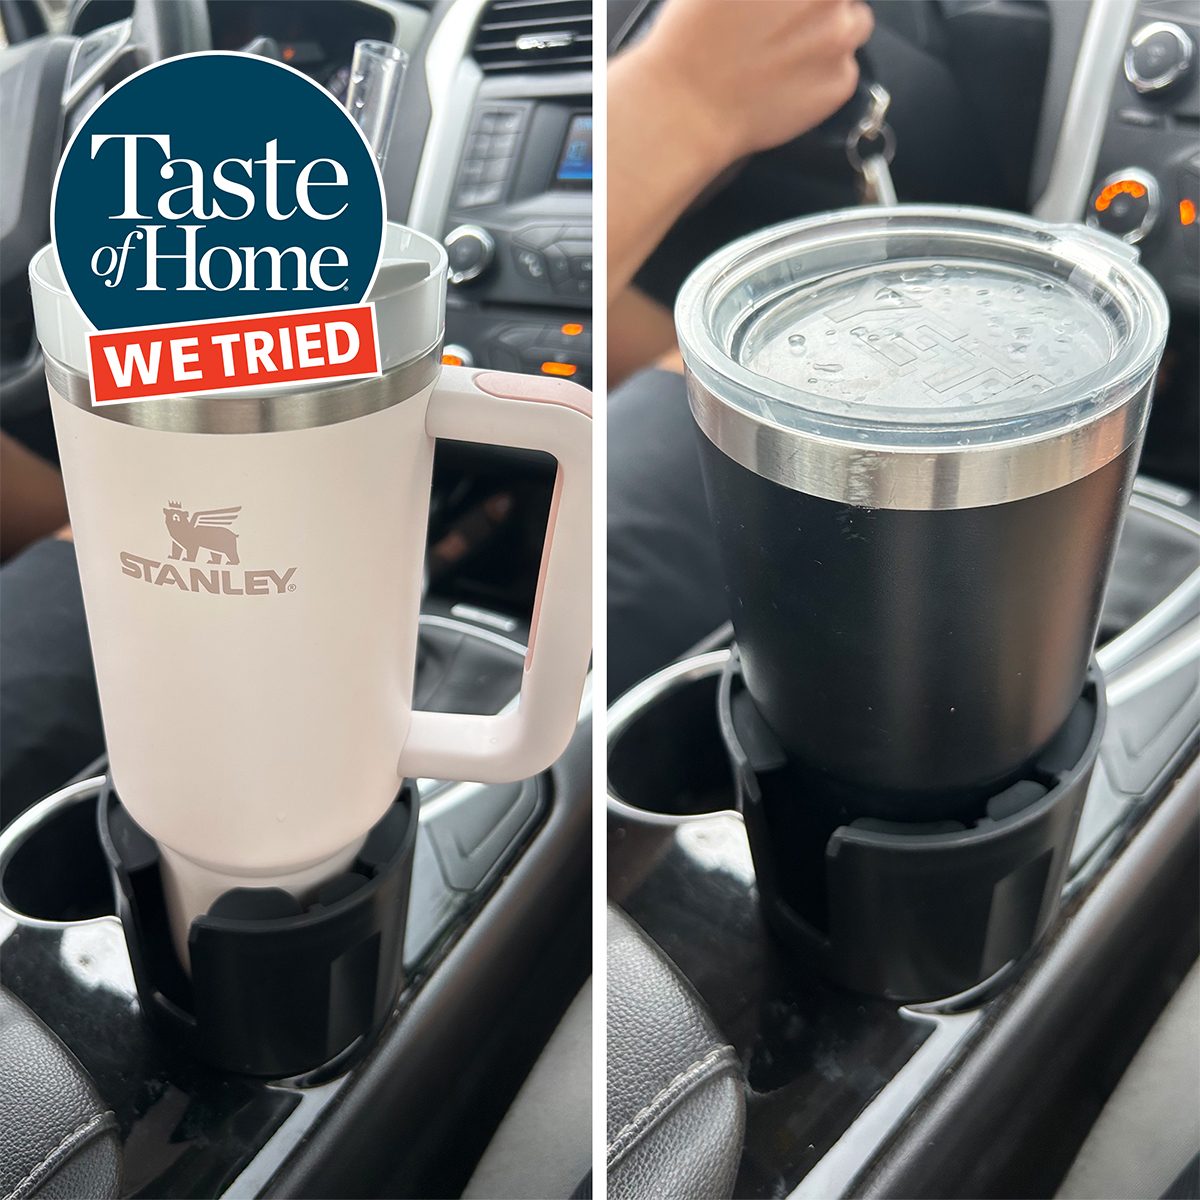 Cup Holder Extender for Car with Phone Holder for Yeti, Hydro Flasks